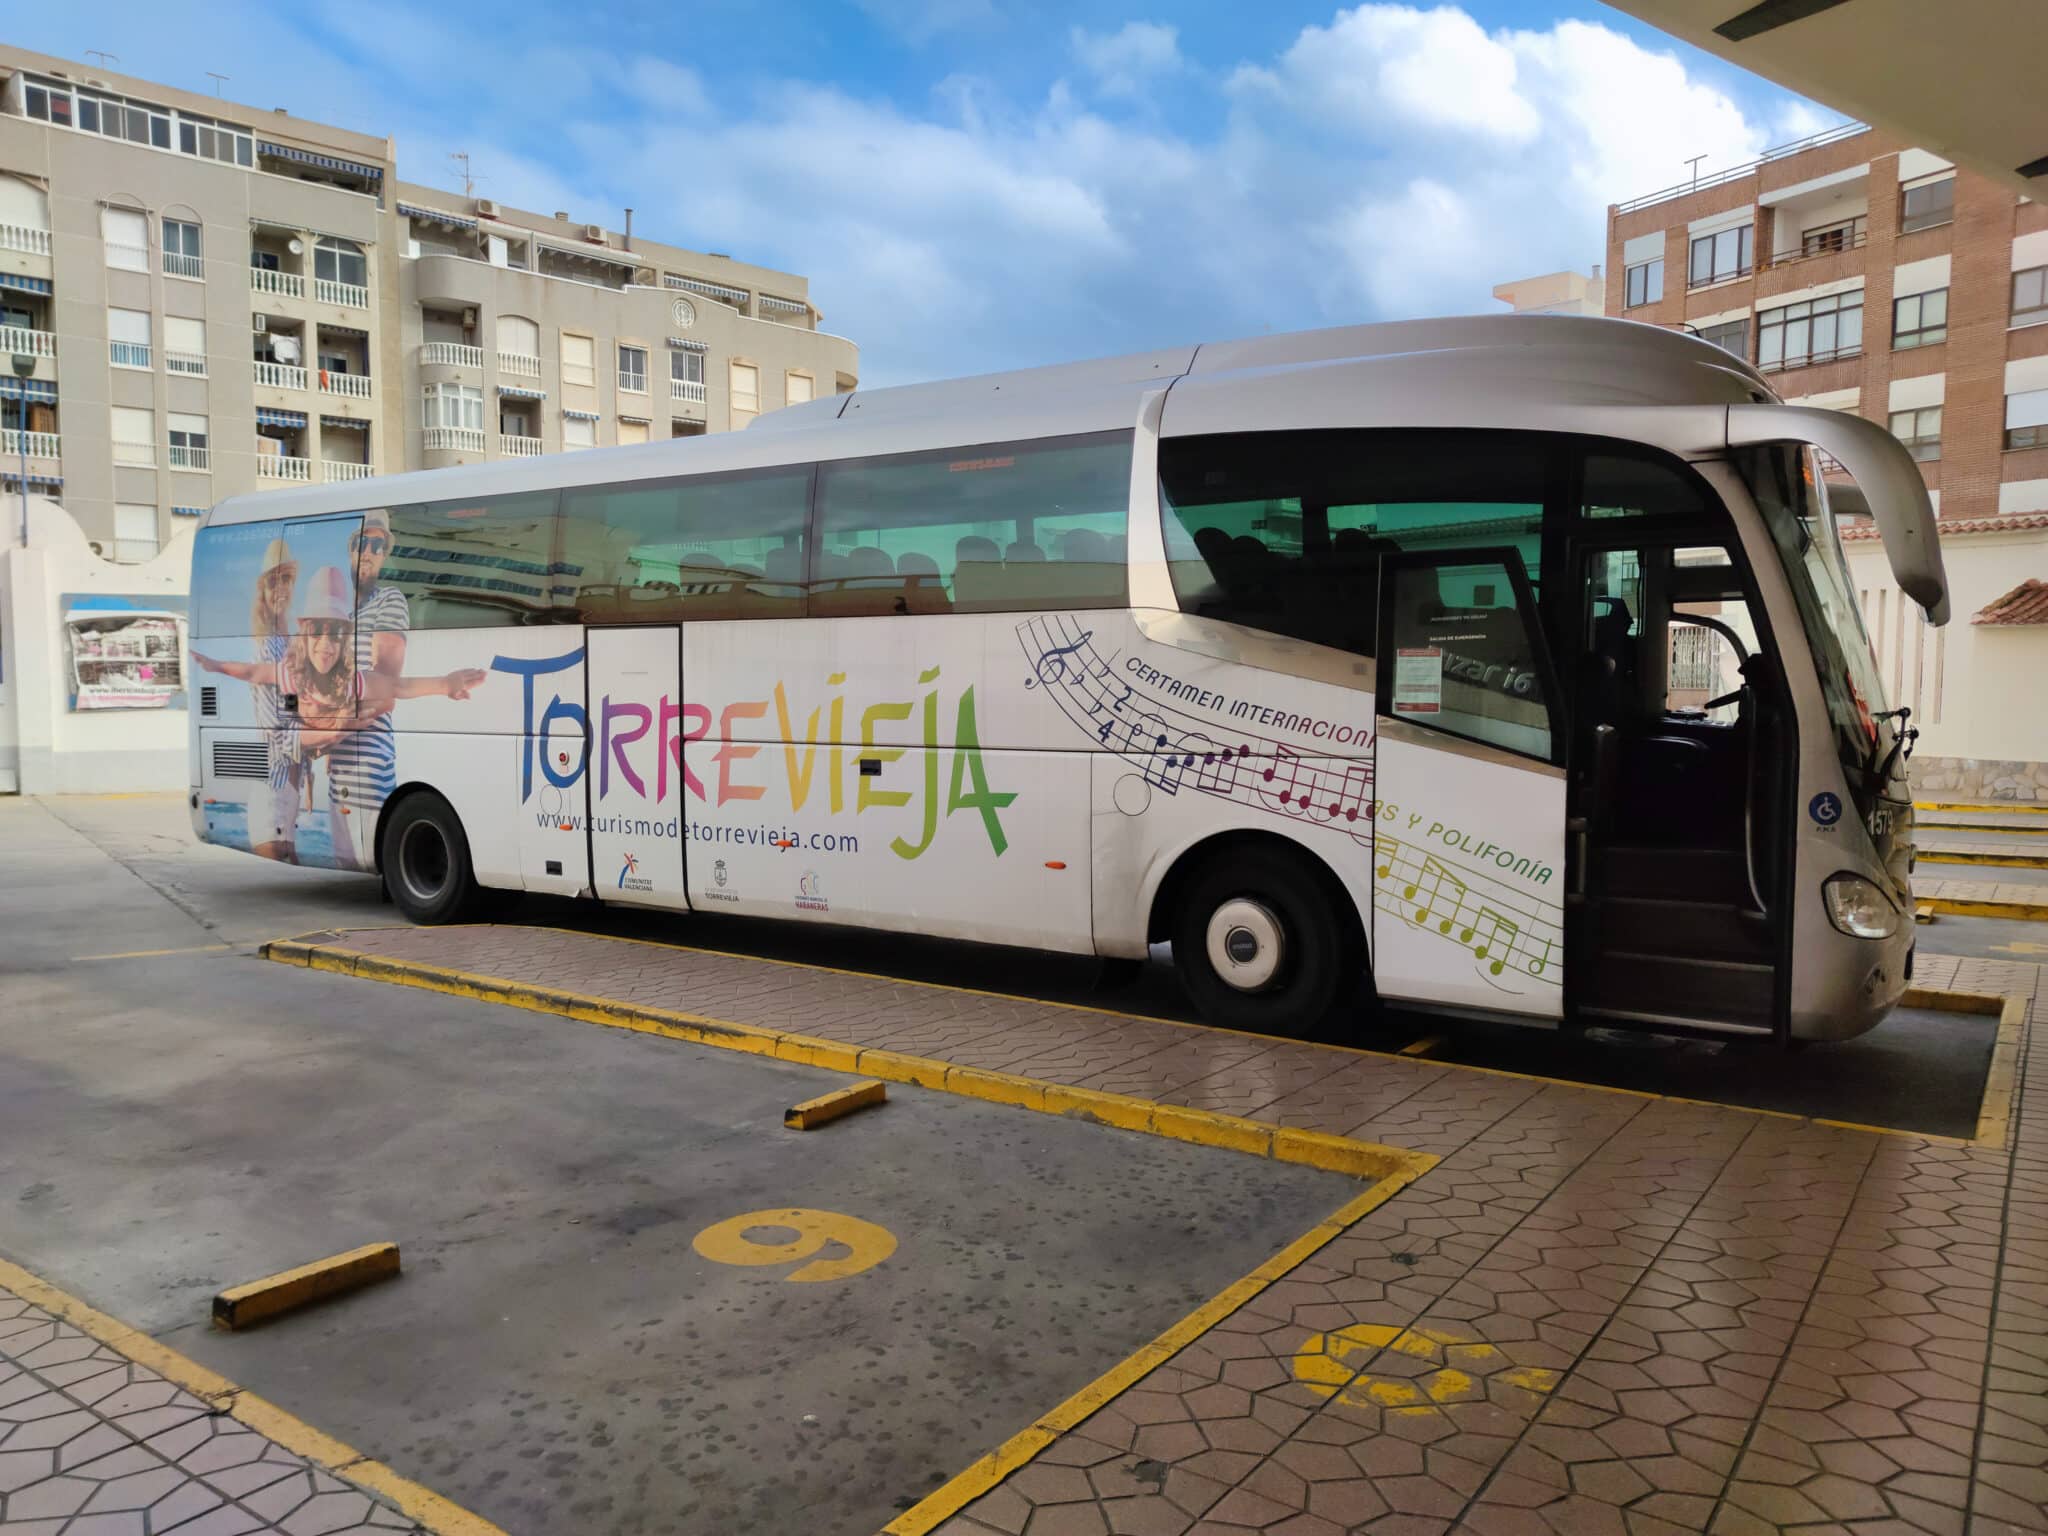 bus station in torrevieja